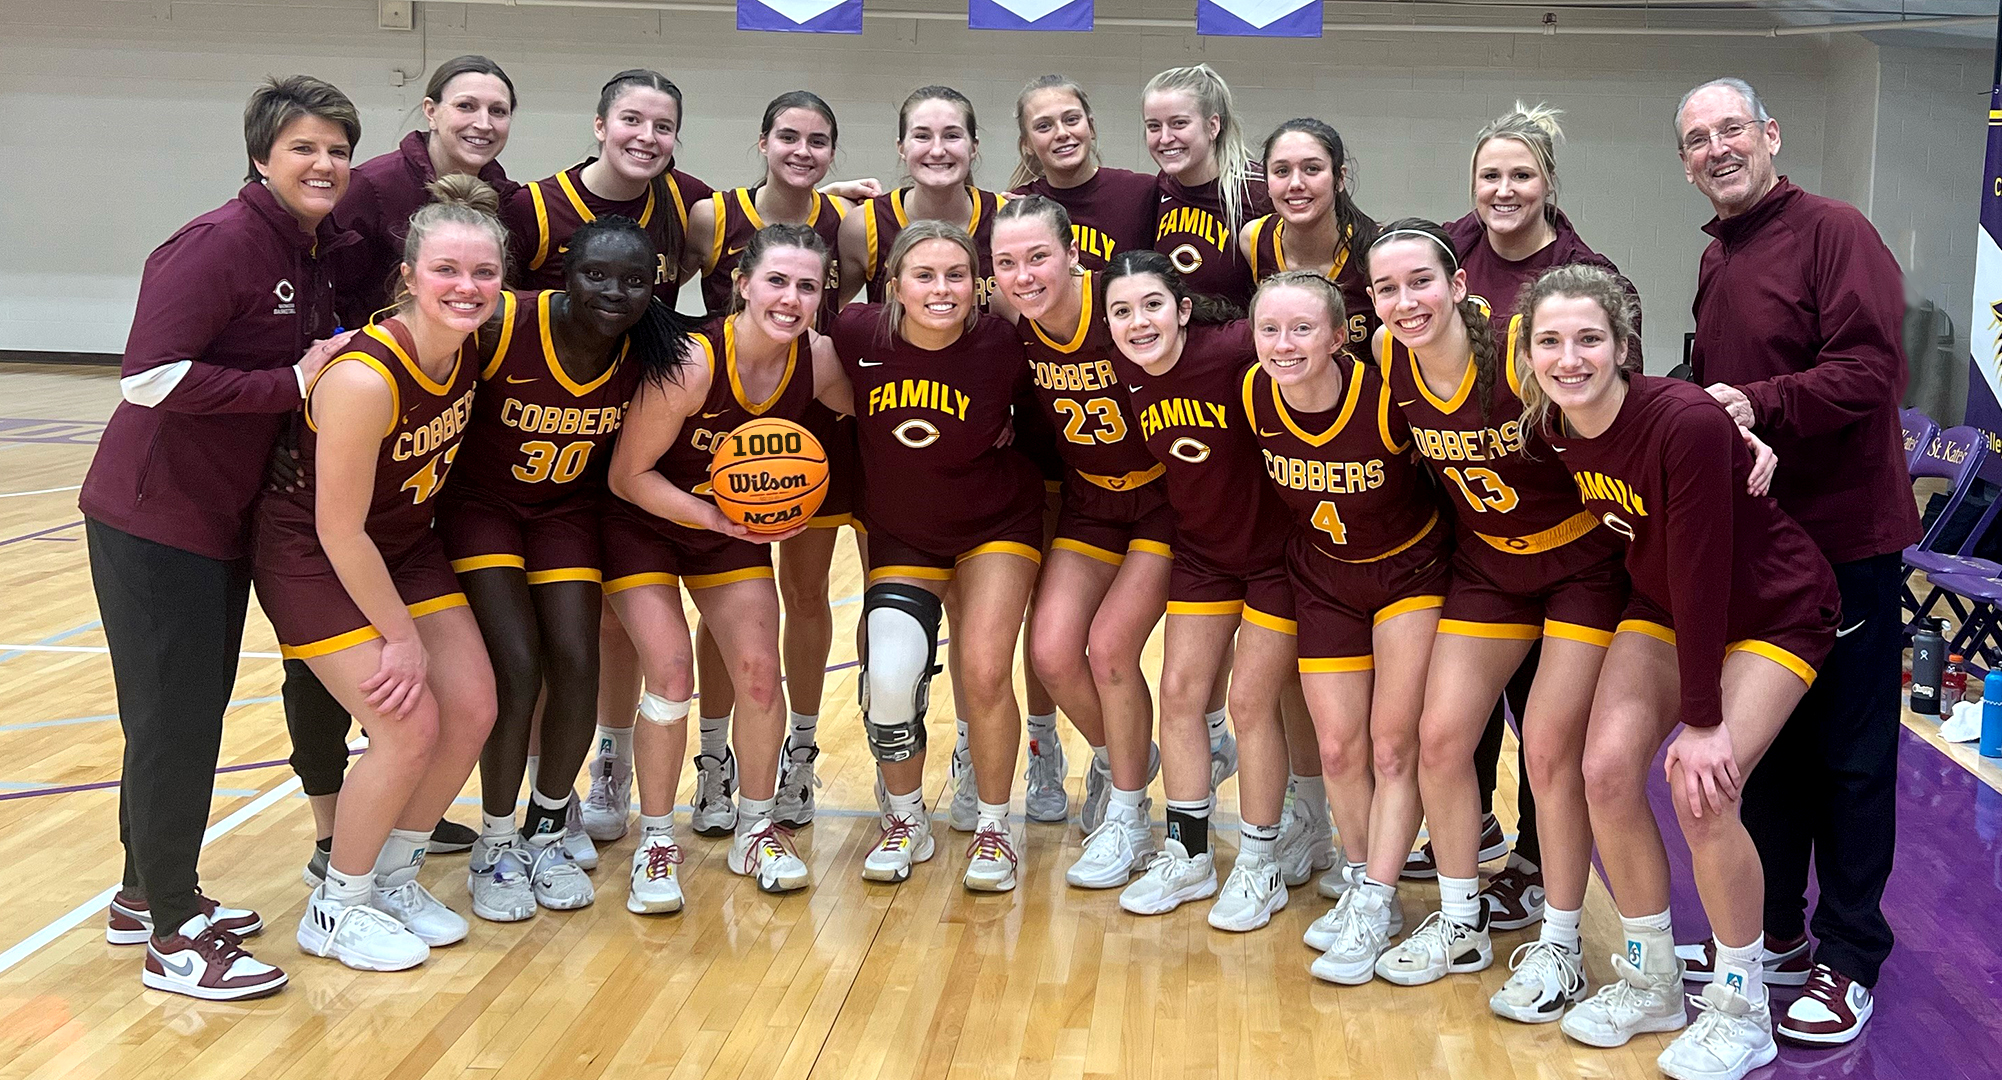 Concordia poses for a picture after their 67-66 win at St. Catherine. Emily Beseman scored her 1,000th career point in the game. (Photo courtesy of SCU SID)